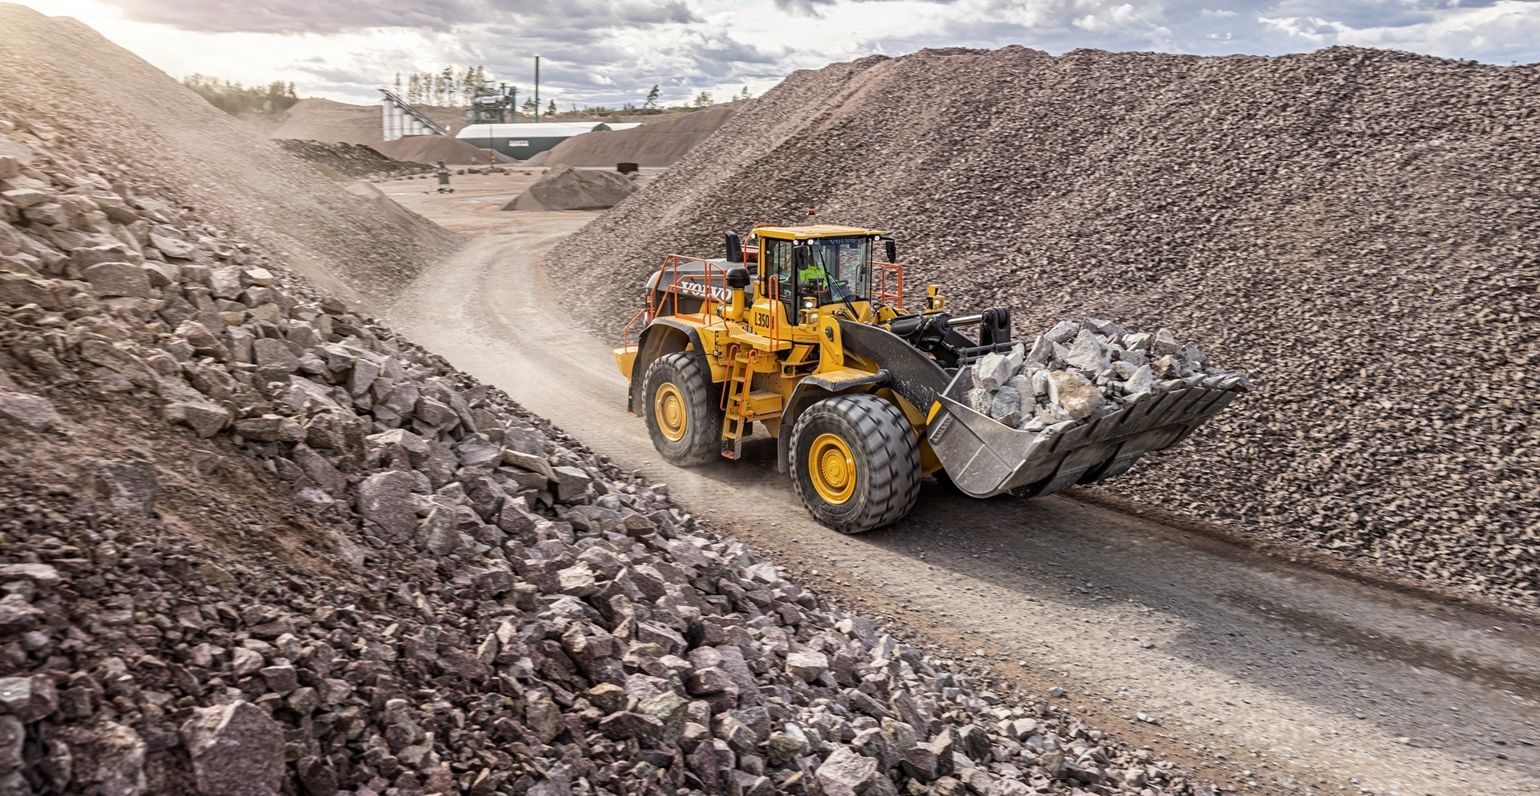 Built to take on the toughest jobs, the upgraded Volvo L350H wheel loader is coming to North America to further enhance customer profitability.